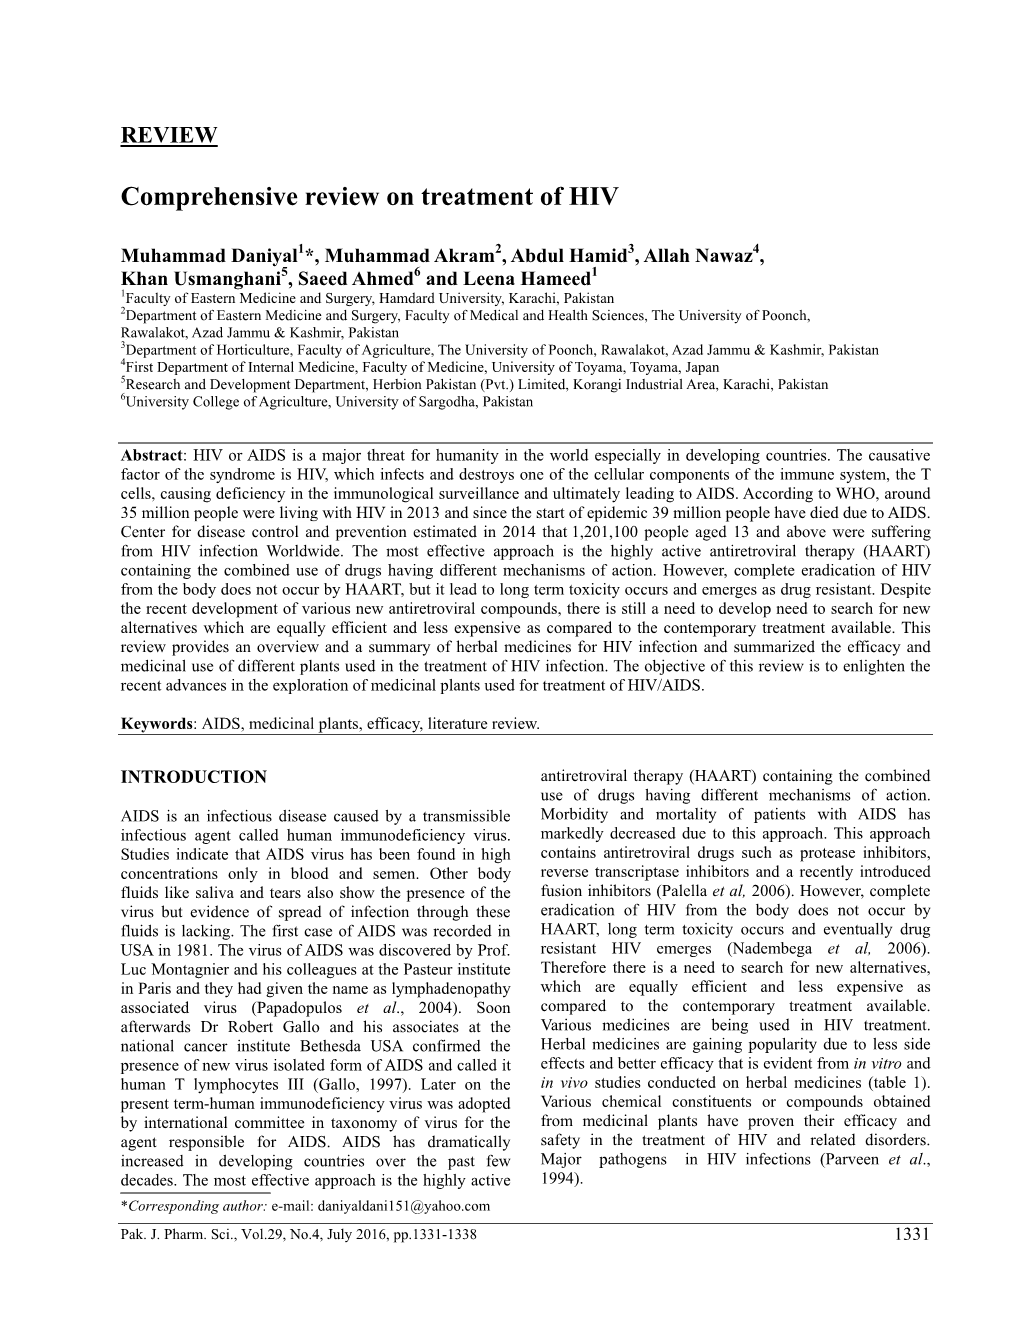 Comprehensive Review on Treatment of HIV